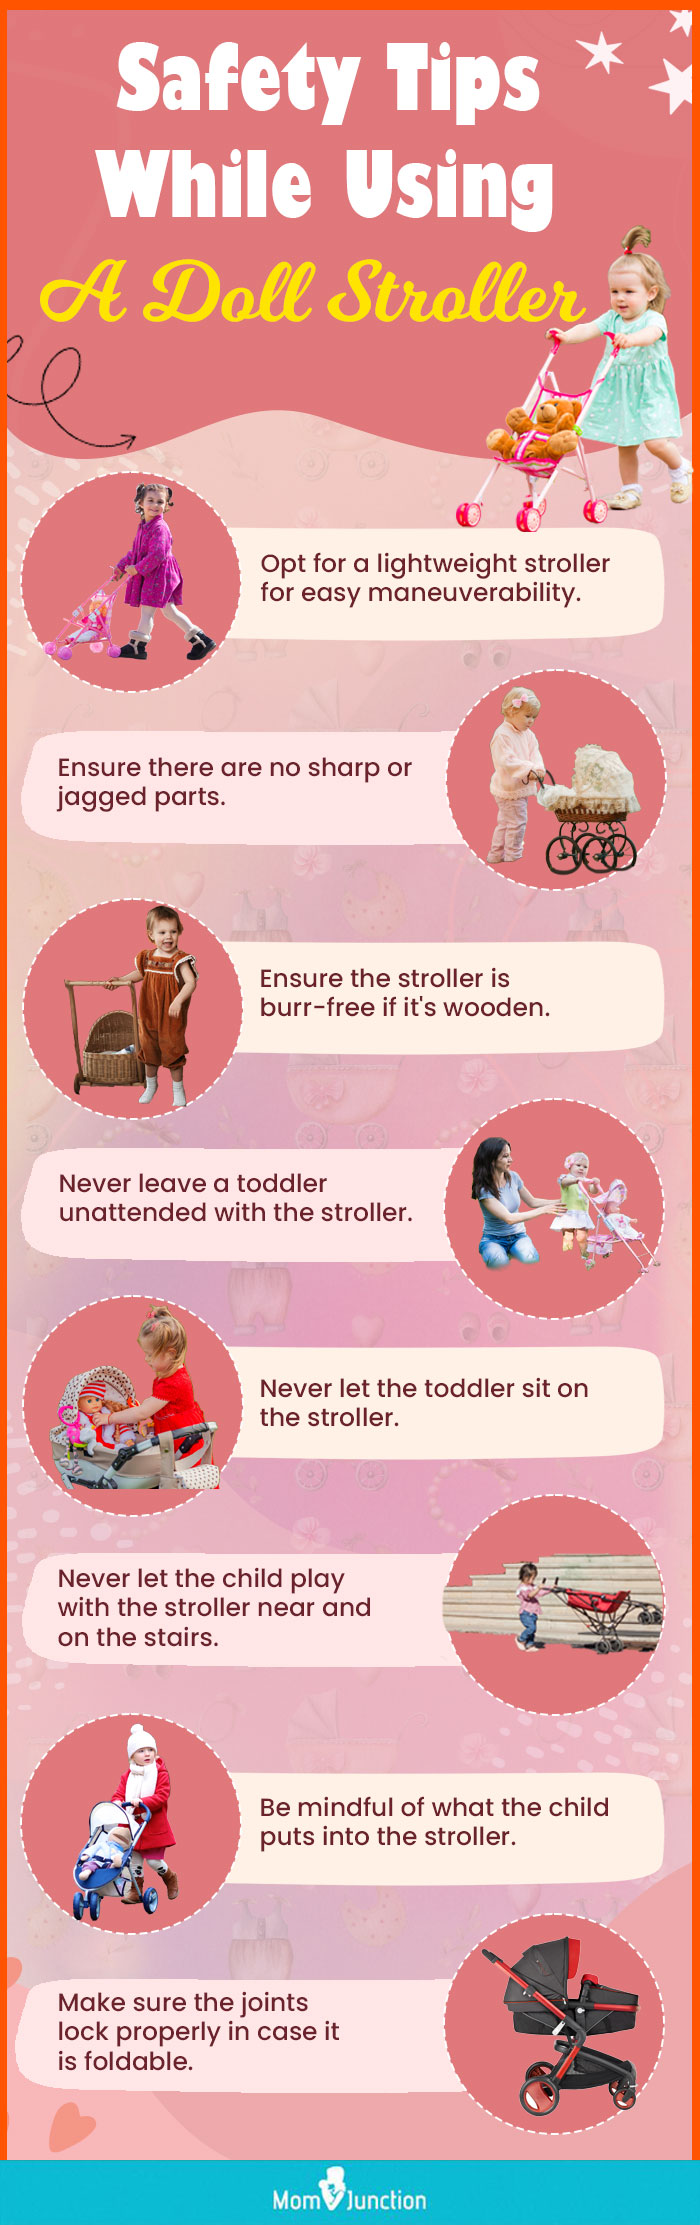 Safety-Tips-While-Using-A-Doll-Stroller